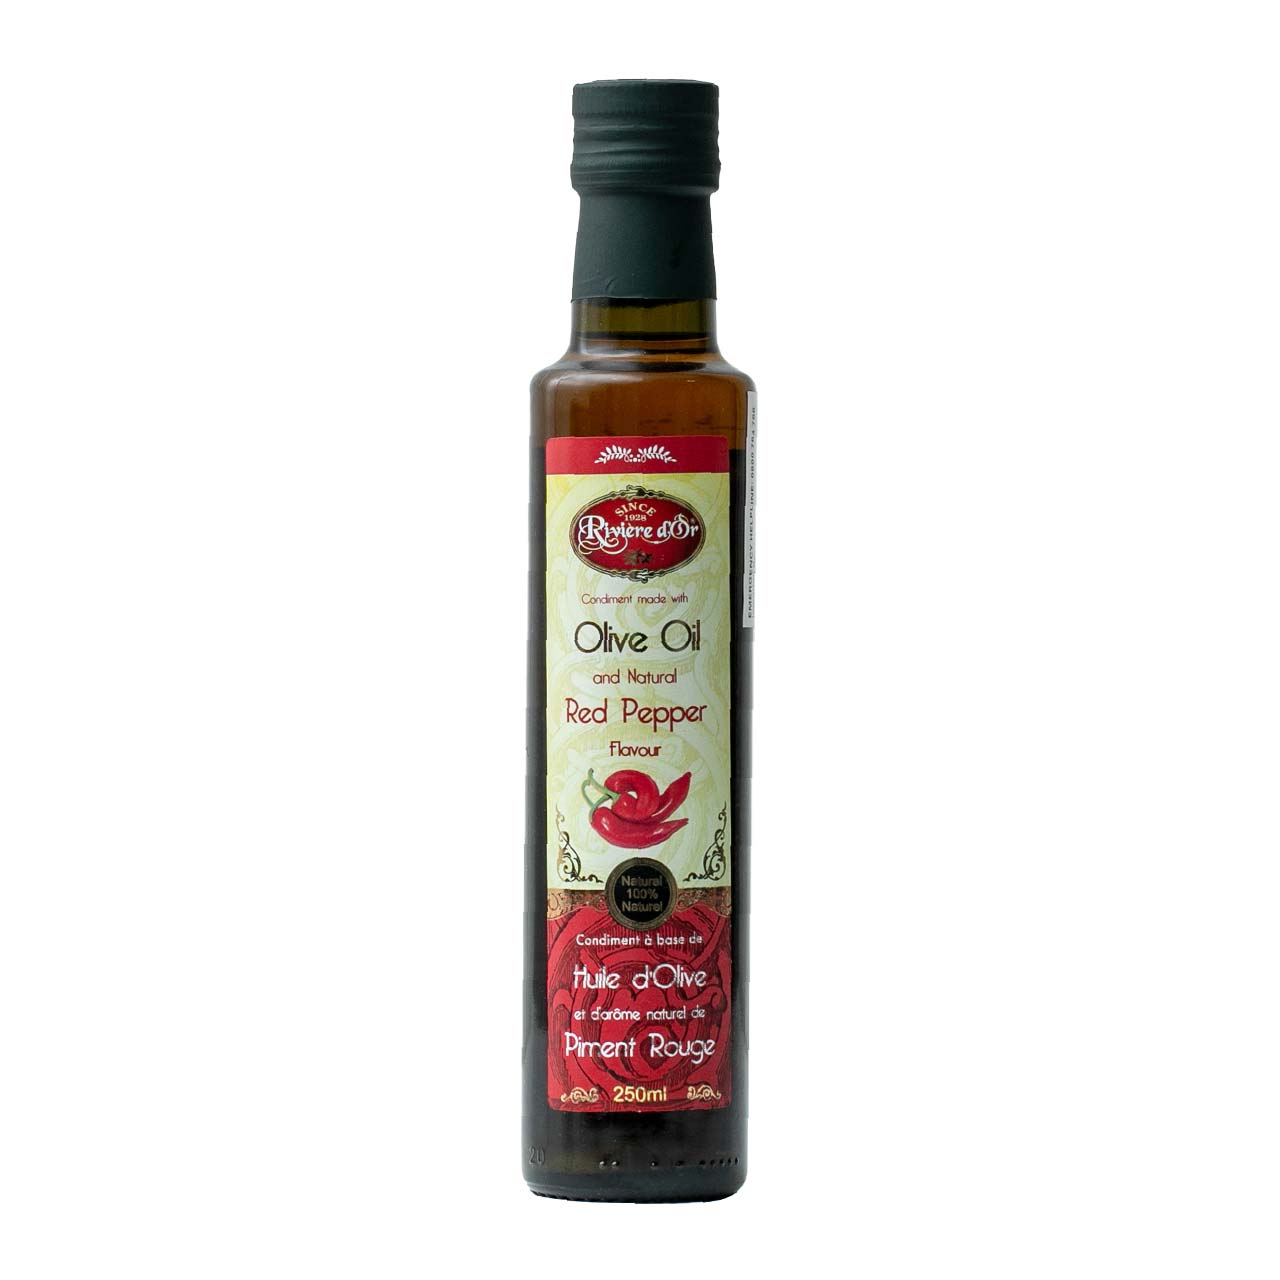 Riviere-d-Or-Olive-Oil-Red-Pepper-front